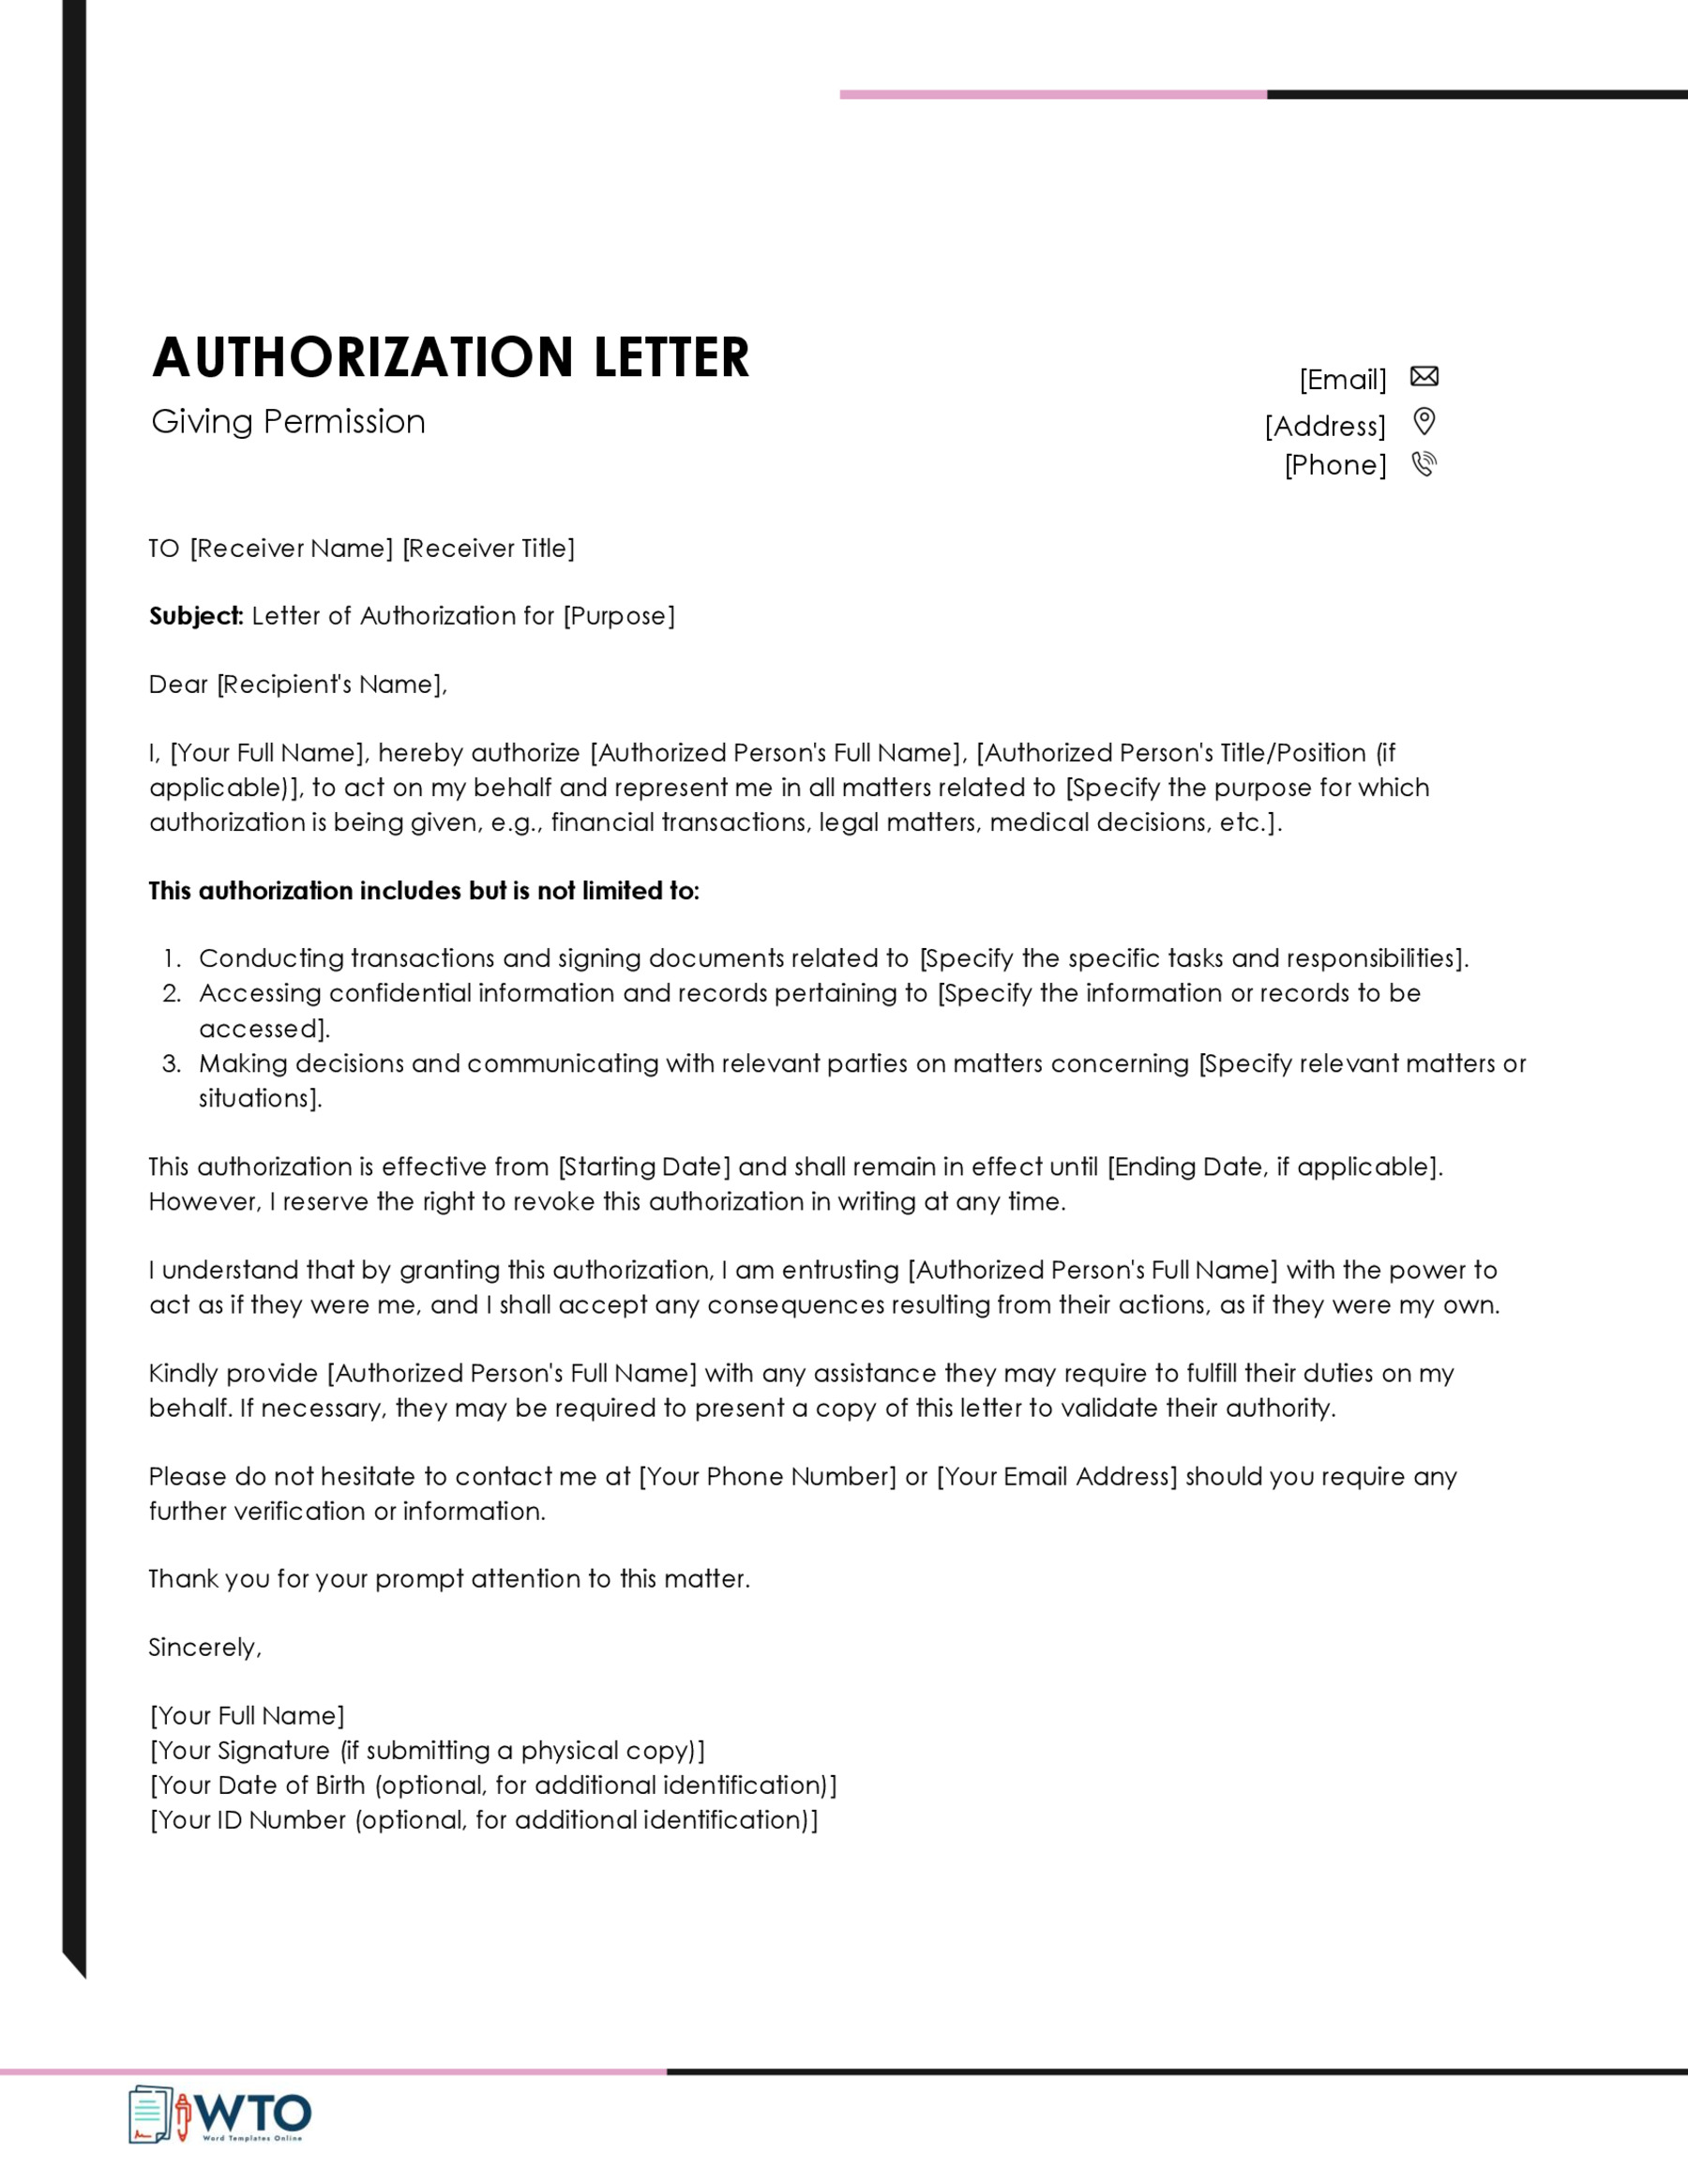 Letter of Authorization Giving Permission Template in word format